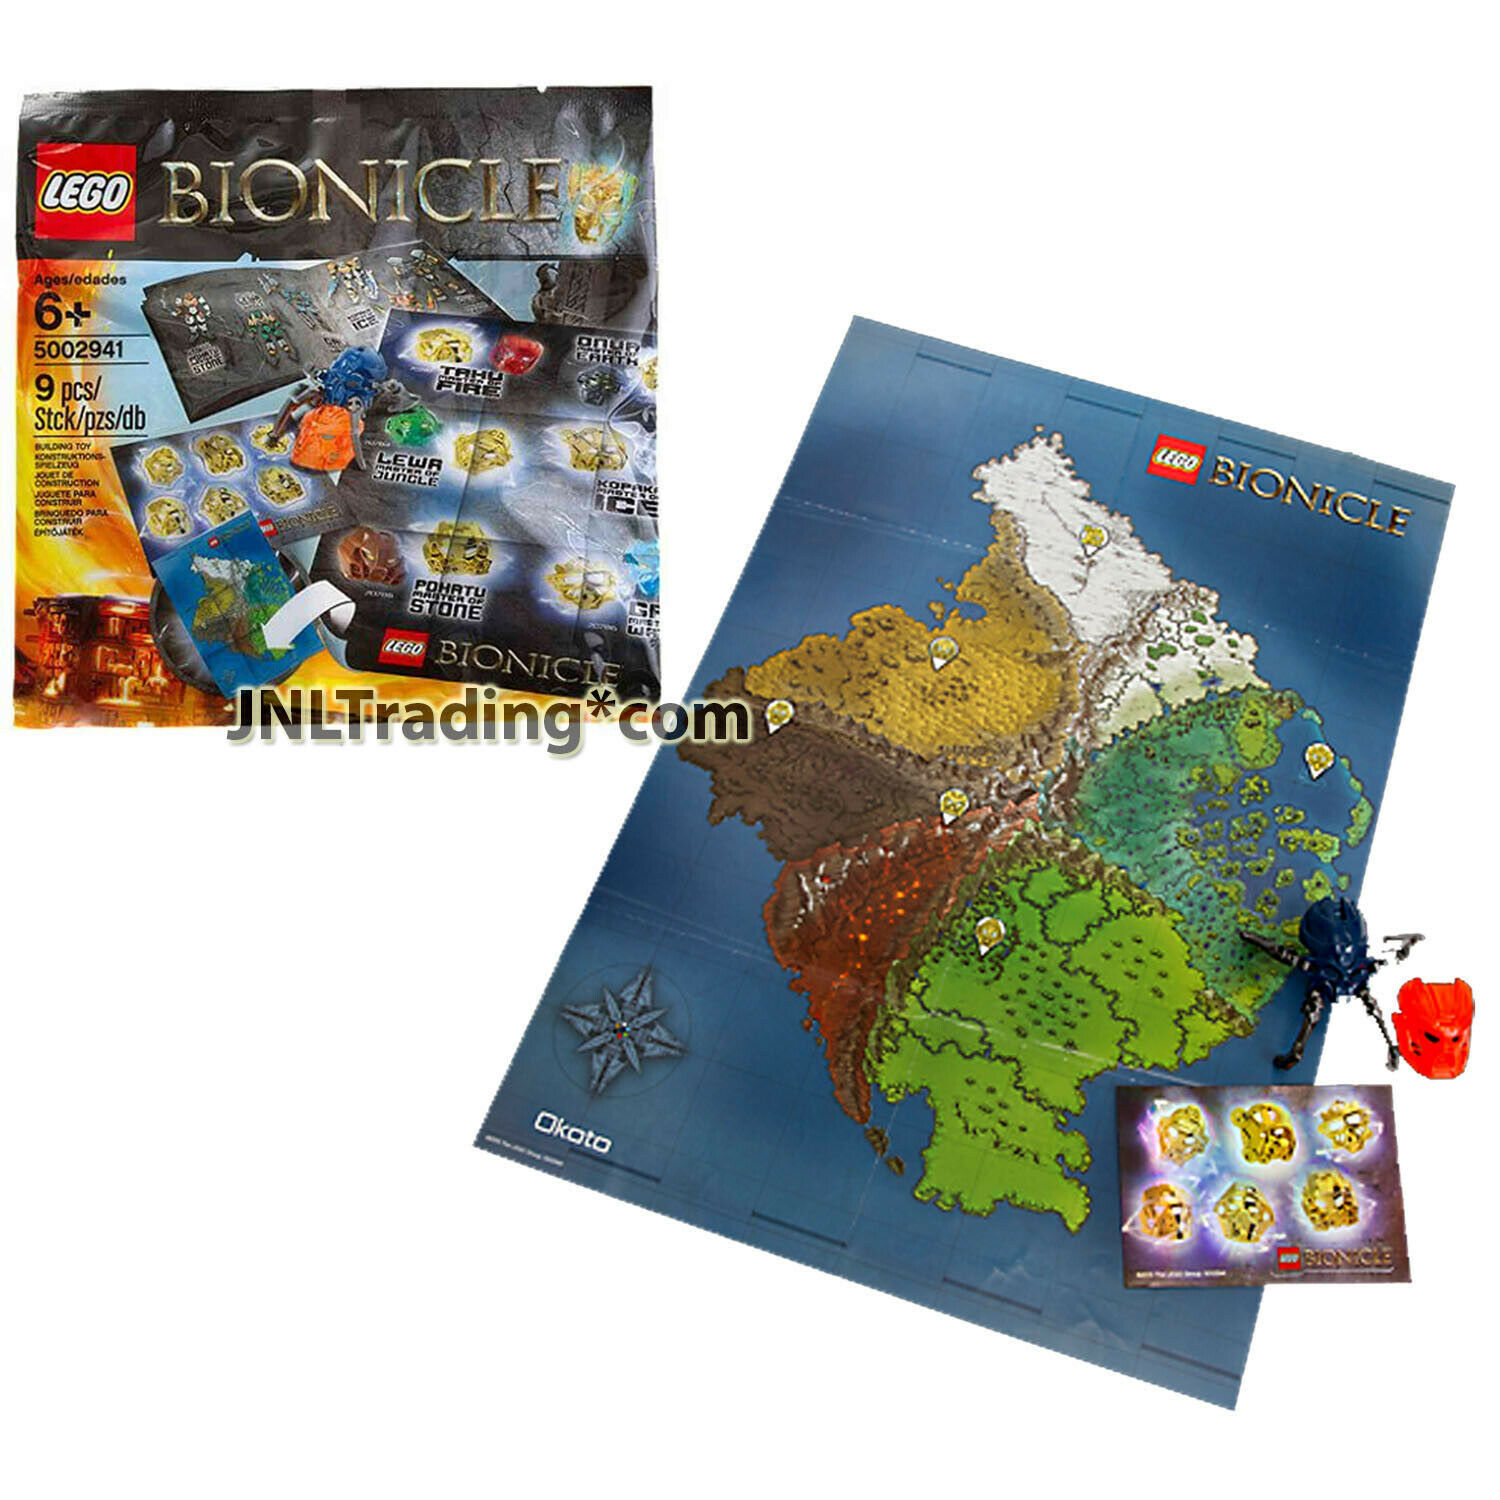 Yr 2015 Lego Bionicle Hero Pack 5002941 w/ Mask, Skull Spider and Poster (9 Pcs) - $14.99